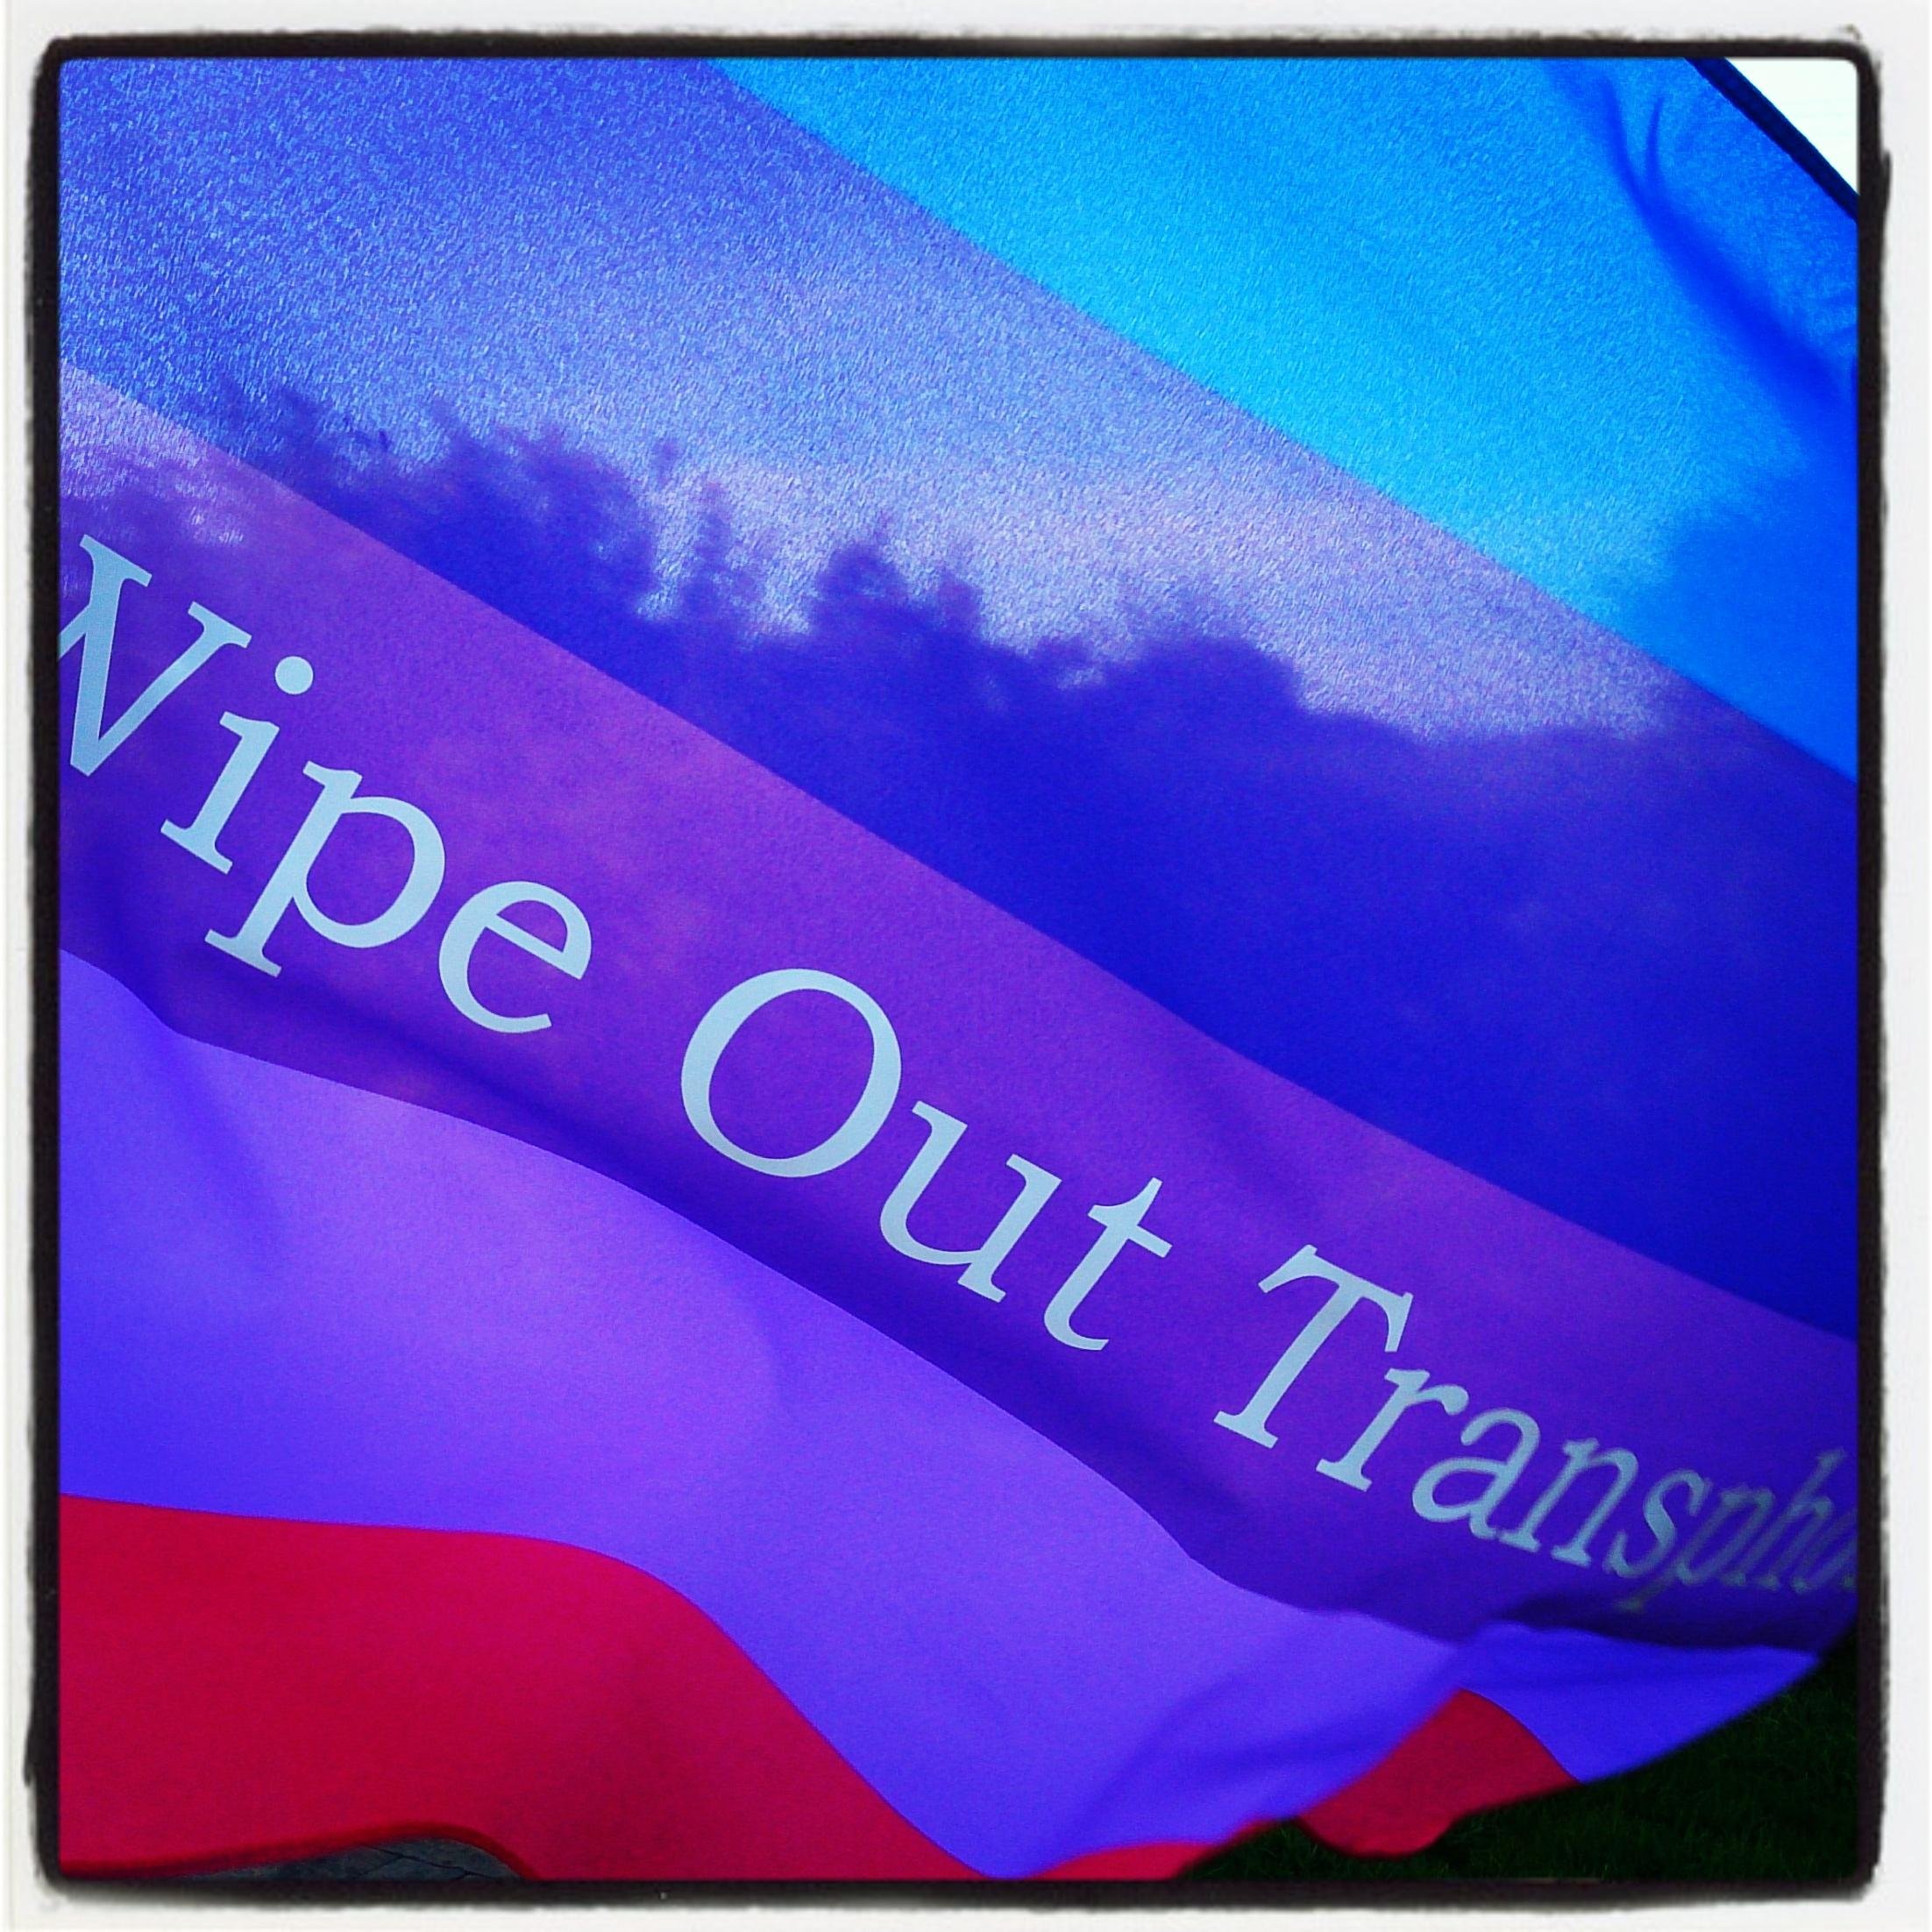 Official Twitter of Wipe Out Transphobia - worldwide gender diverse activism, education and campaigning. https://t.co/lhOaOlo7fd…